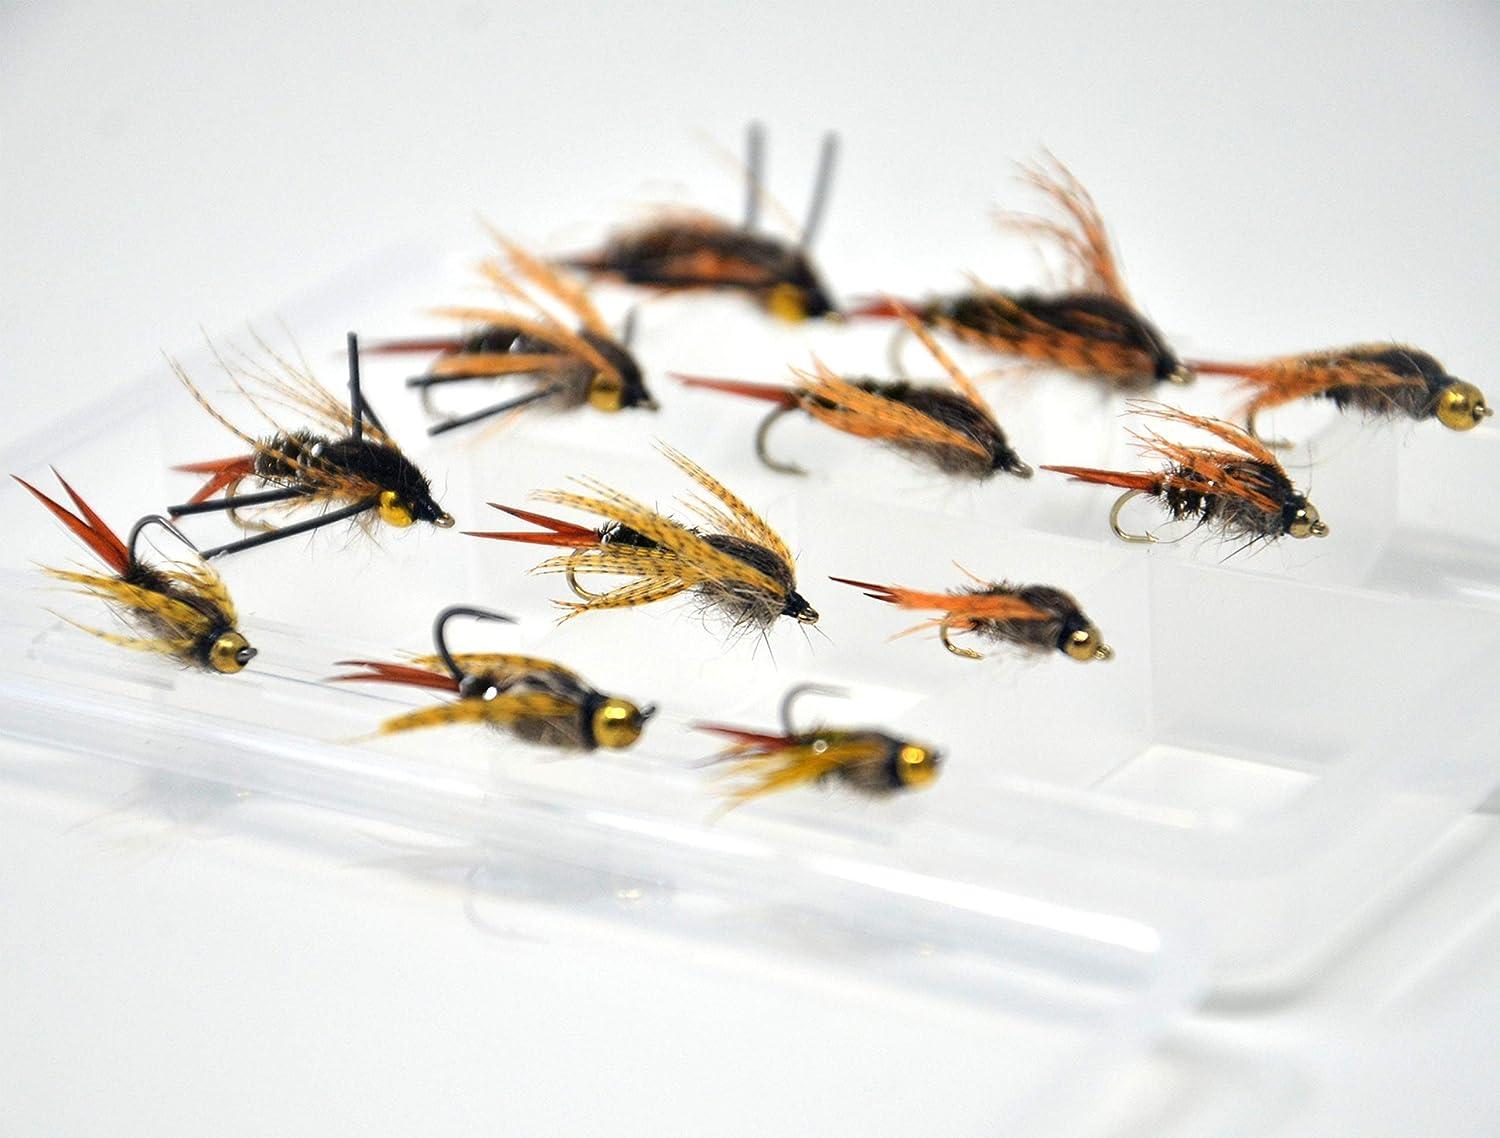 Lot of 20 New Custom Fly Fishing Flies Trout Lures Bugs